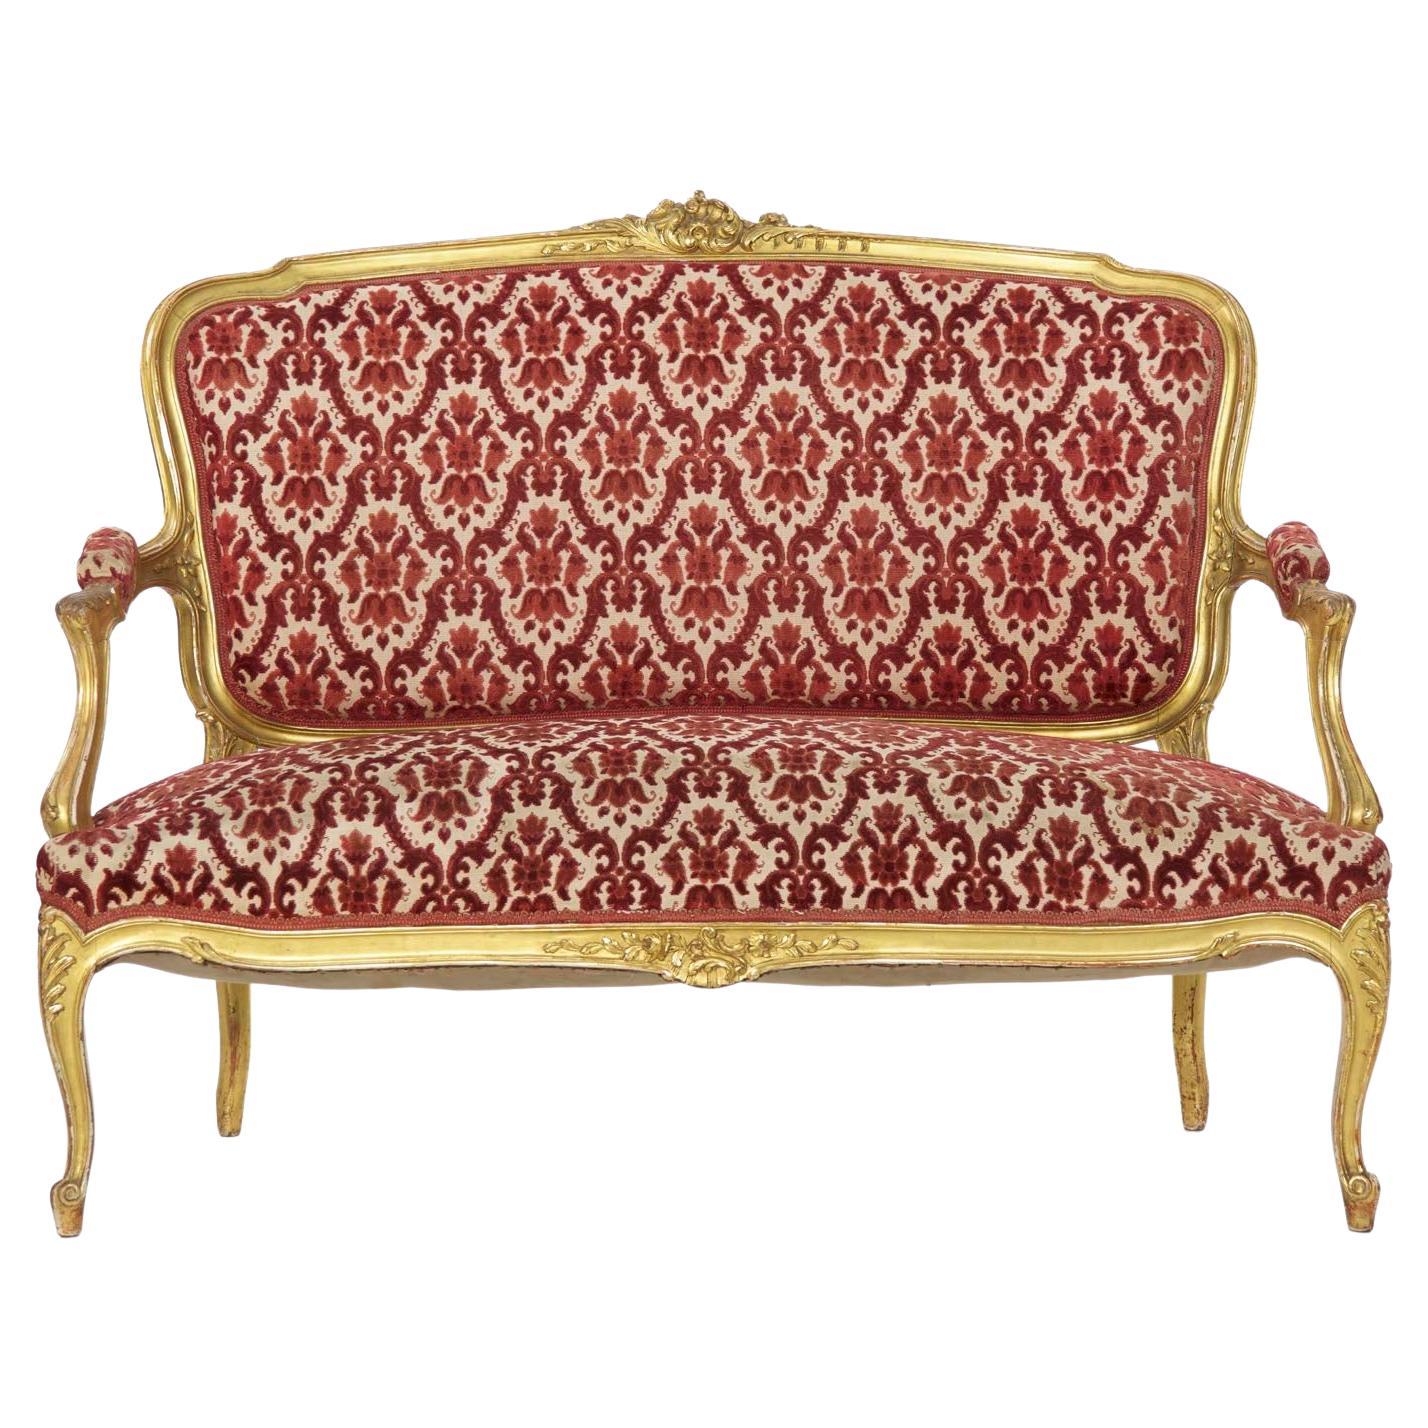 A gorgeous and sleek settee of fine quality with crisp carvings and an excellent profile, this is an excellent strike point piece for the salon or living rooms. Each grouping of carved motifs is centred around the naturalism of acanthus and foliage,